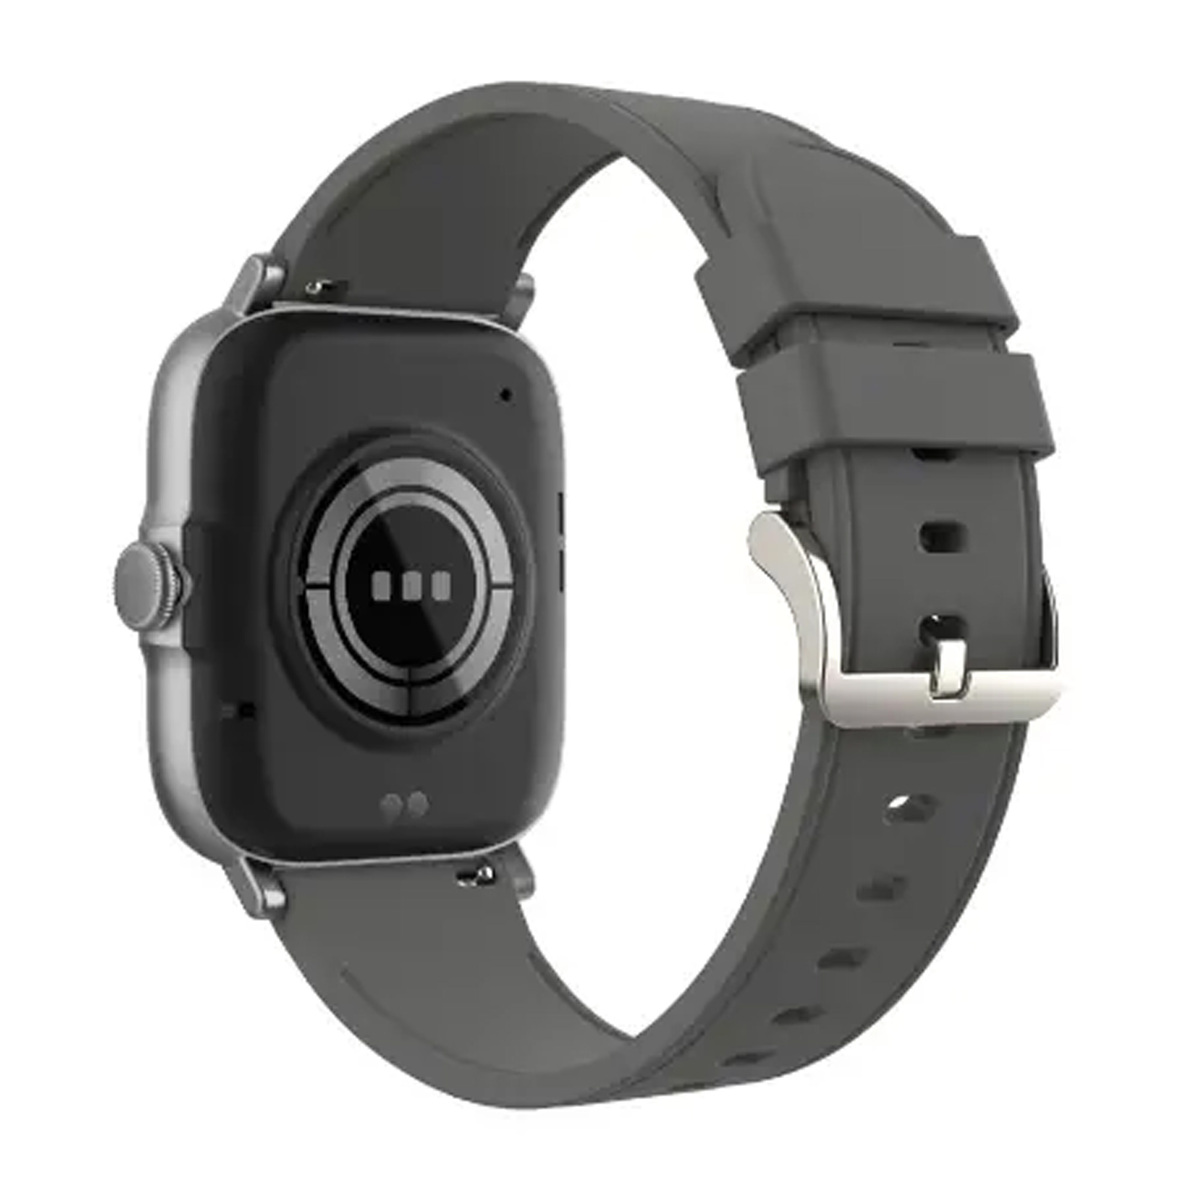 Aukey SmartWatch Fitness Tracker with 10Sport Modes Tracking & Customise WatchFaces with Phone Calls Grey(SW-1P-GR)